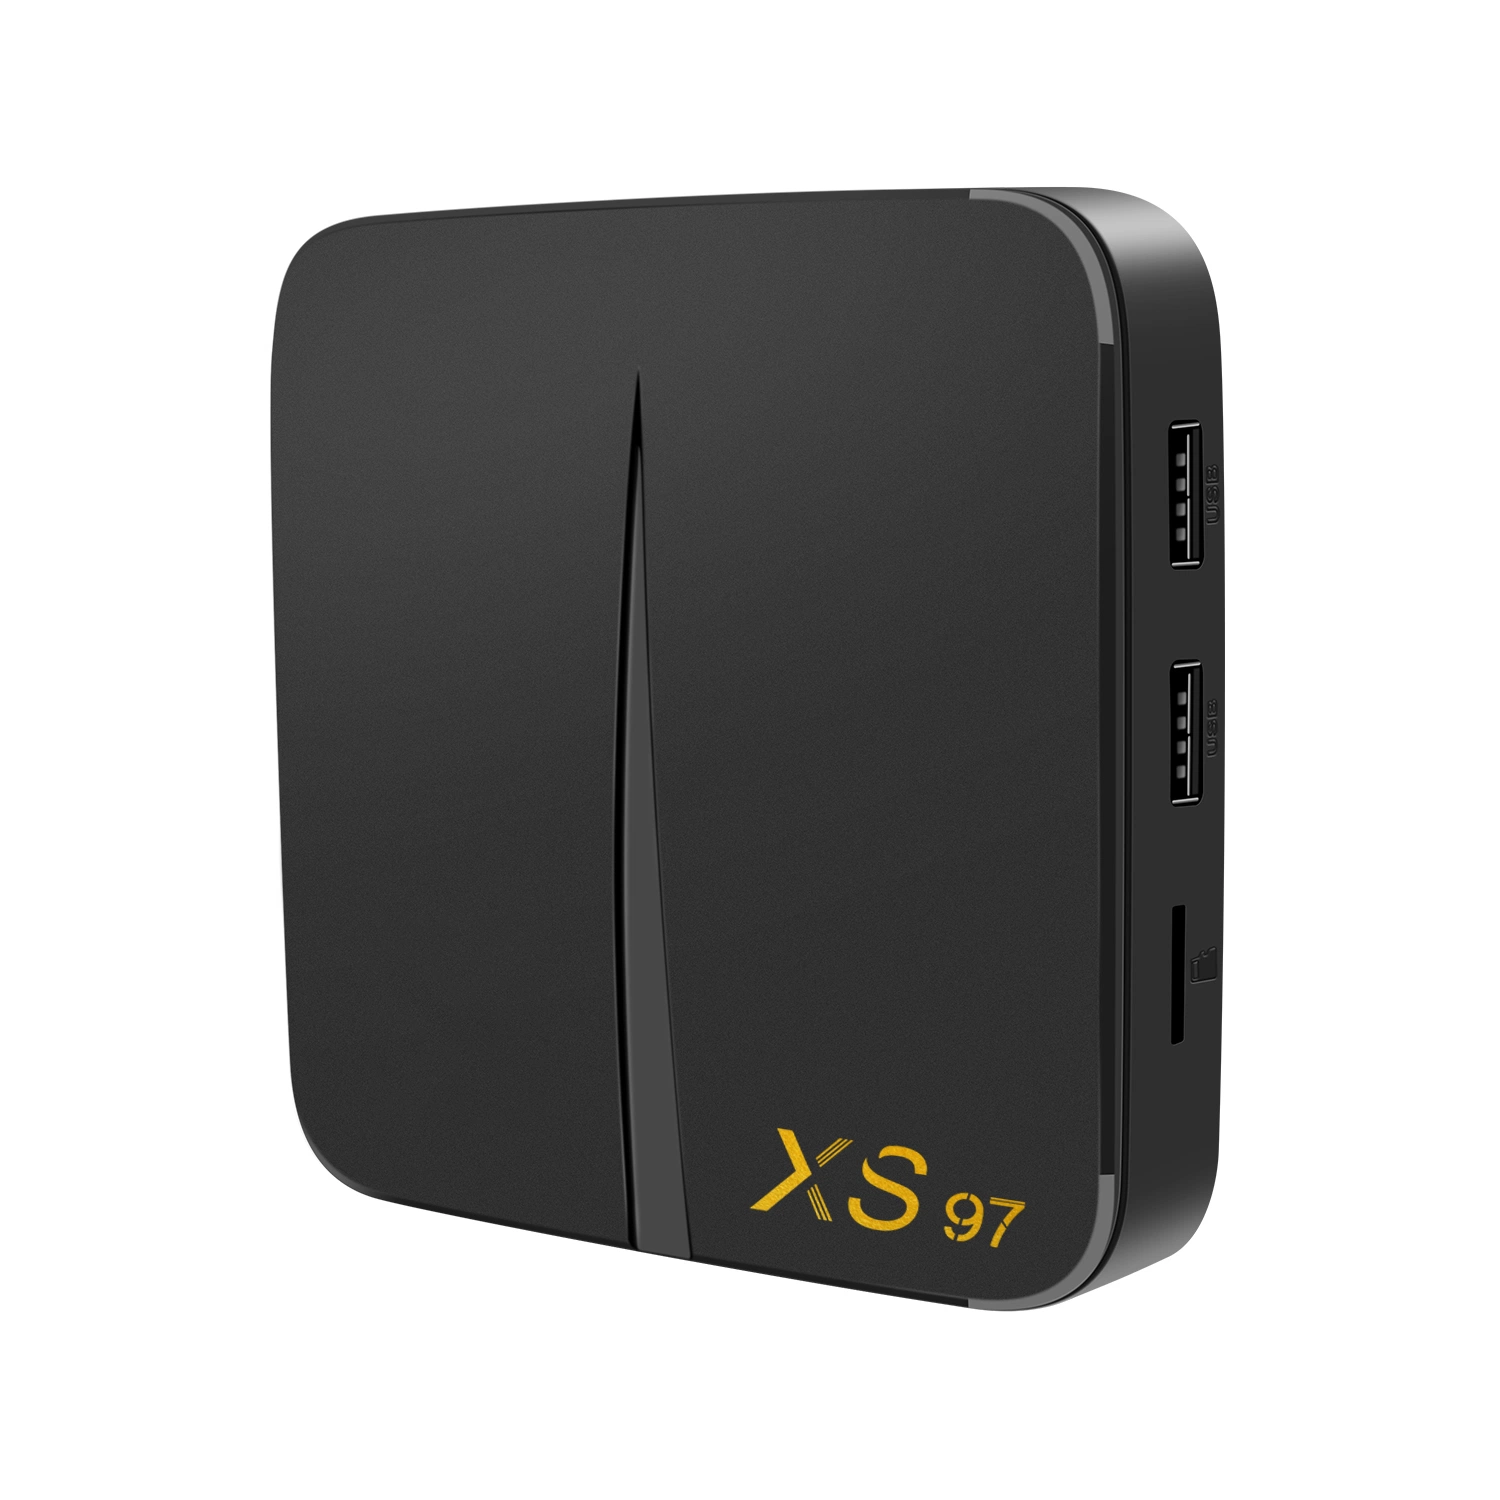 Android TV Box OEM personalizar Amlogic S905W2 de 4 núcleos CPU XS97 Box Android